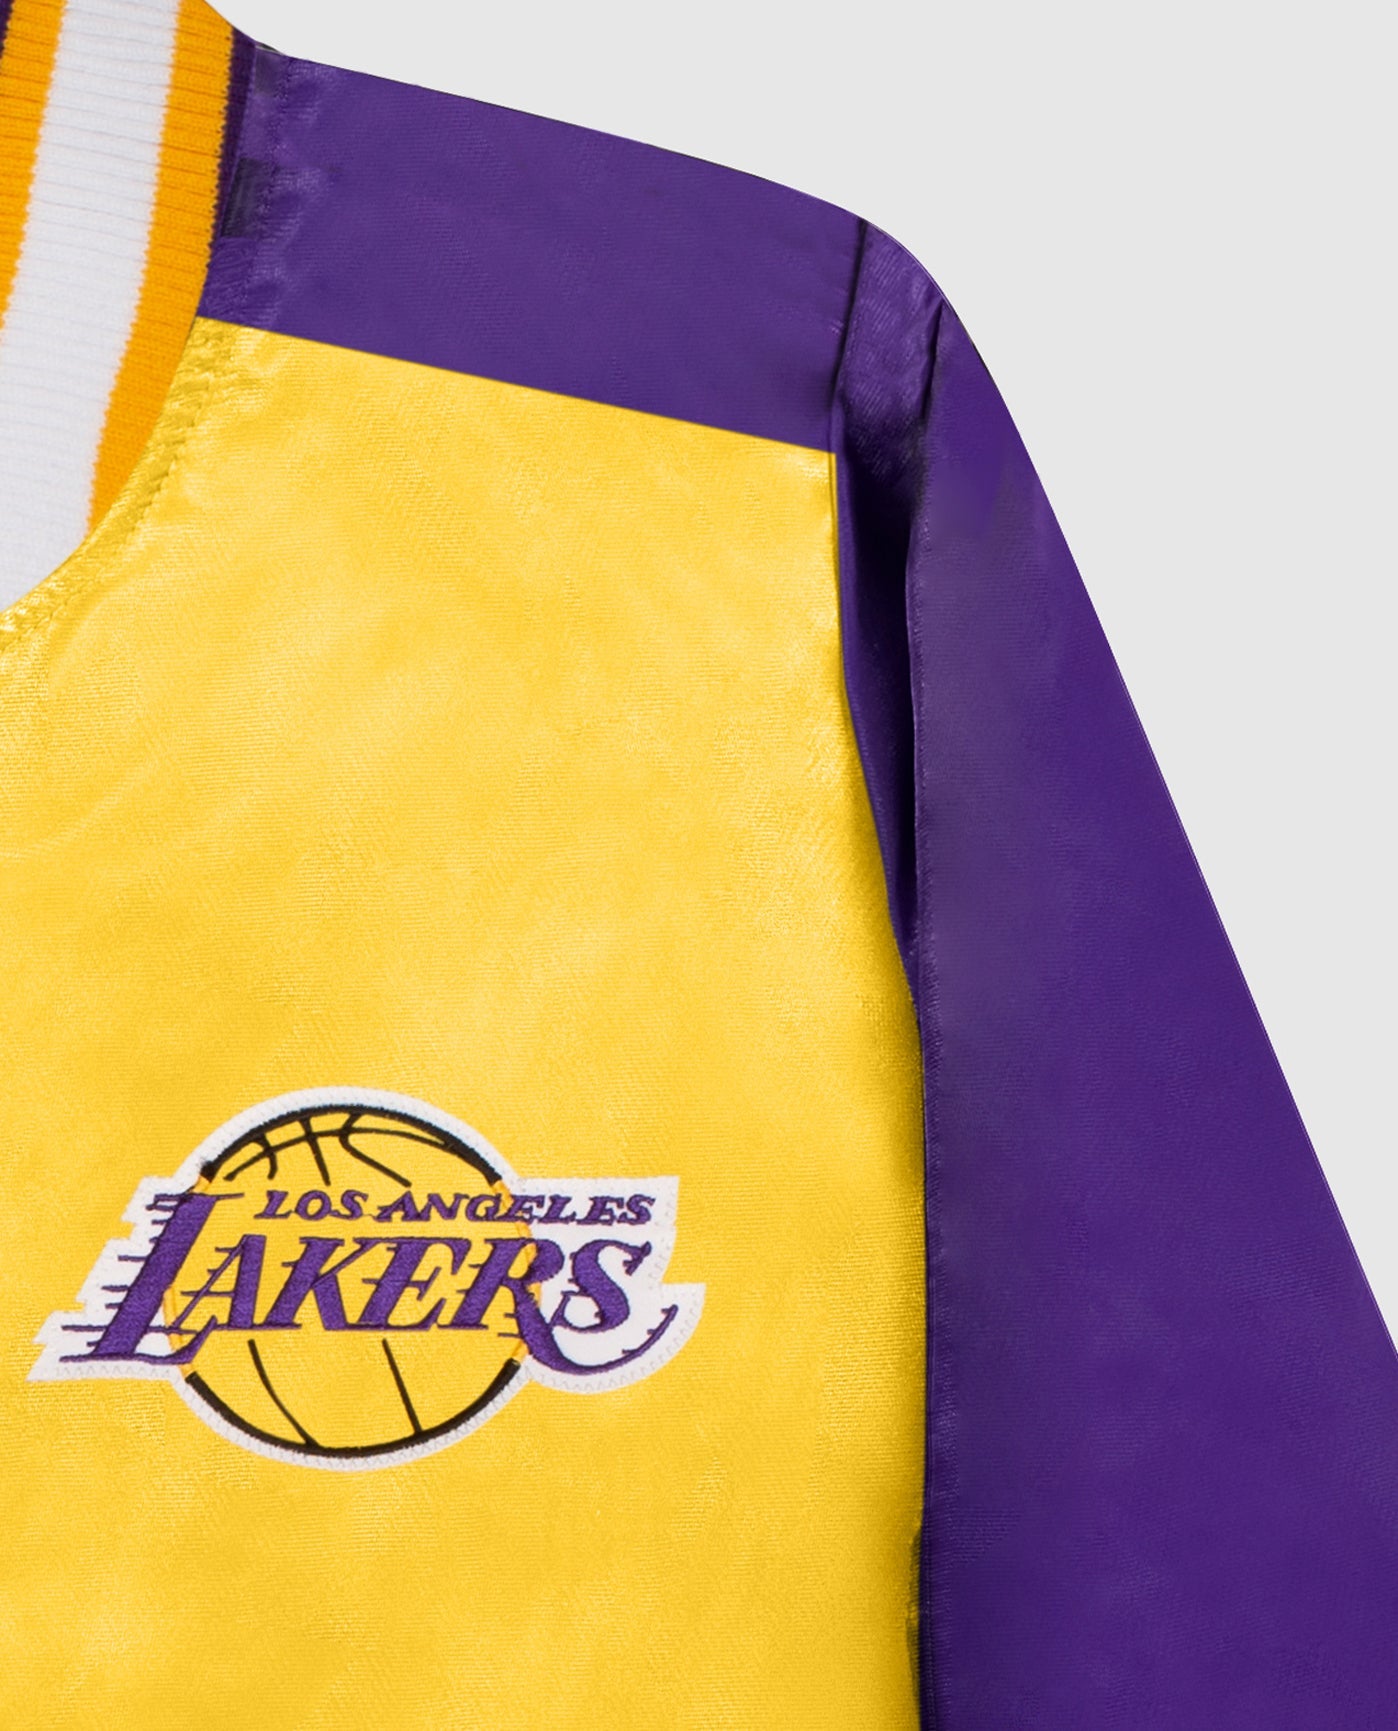 AMERICAN SPORTS CLEAROUT Nike NBA SNAP JACKET LA LAKERS COURTSIDE WOMENS -  Jacket - Women's - amarillo/field pourpre/white - Private Sport Shop